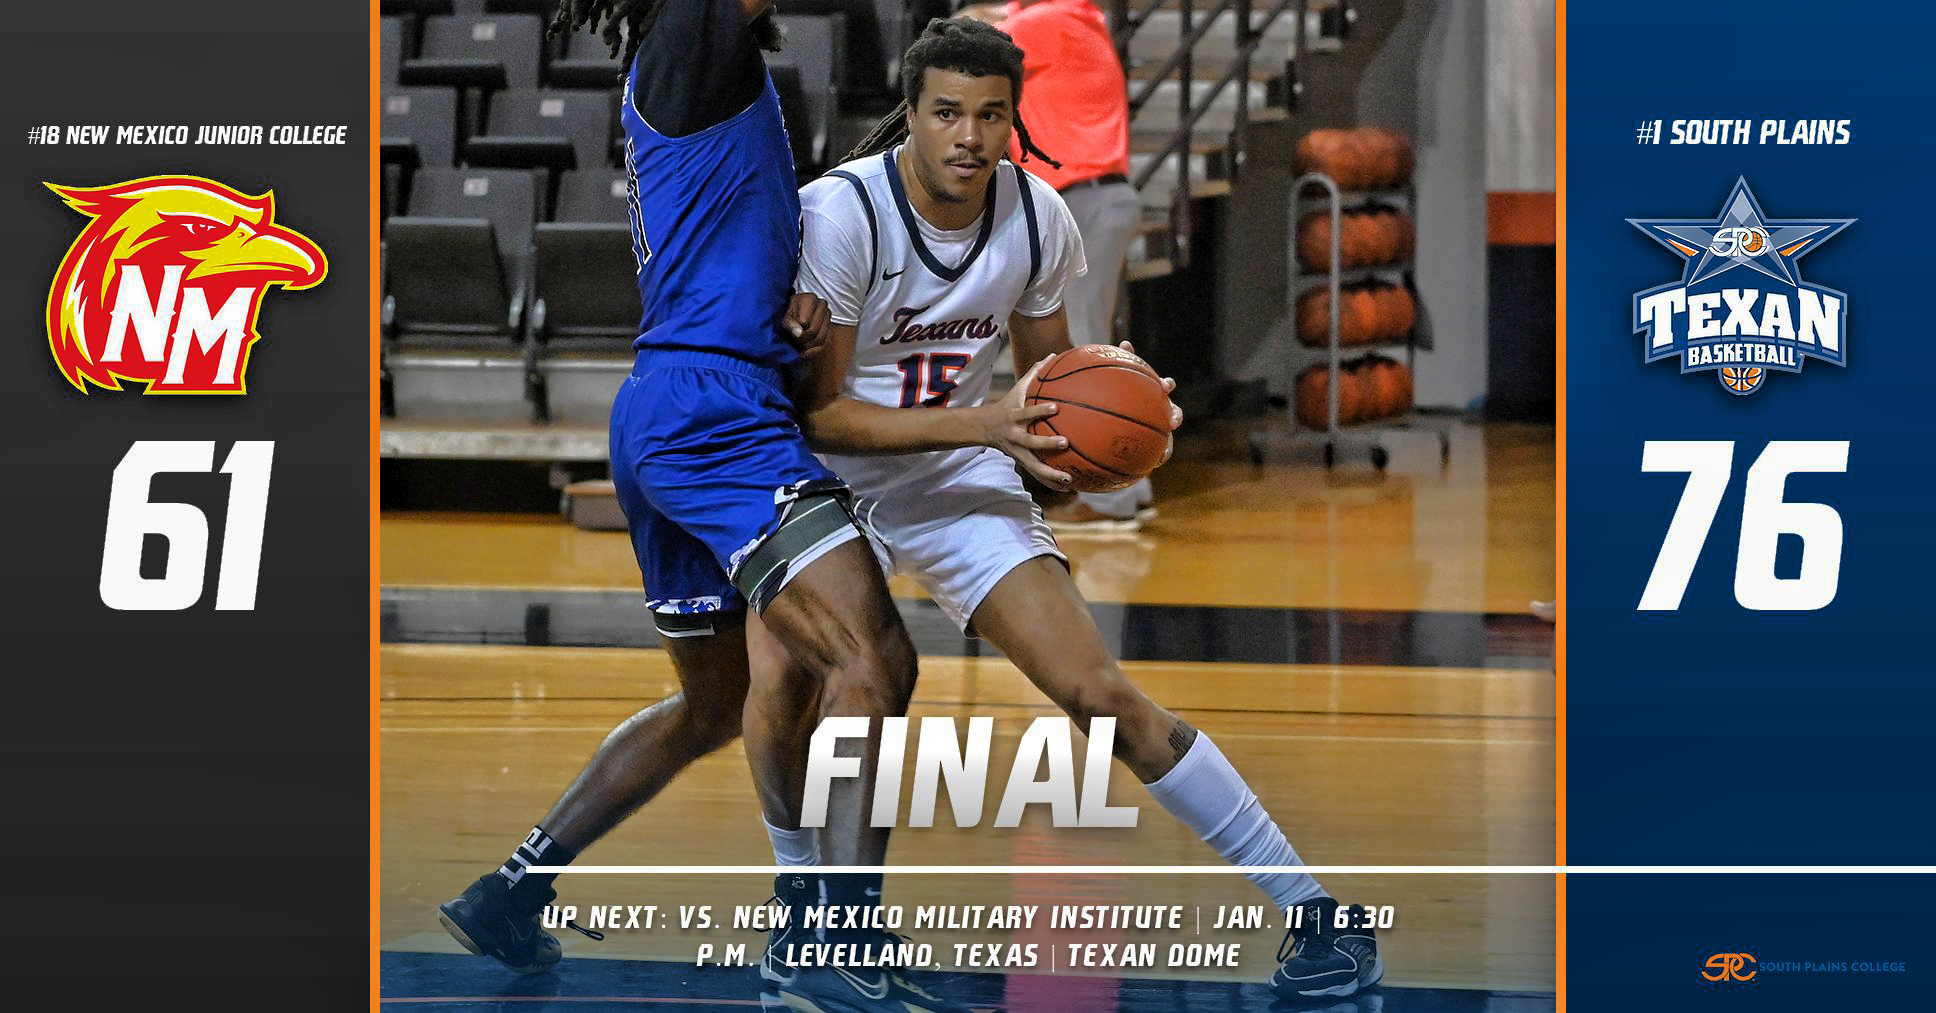 No. 1 Texans cruise past No. 18 New Mexico Junior College 76-61 in conference opener